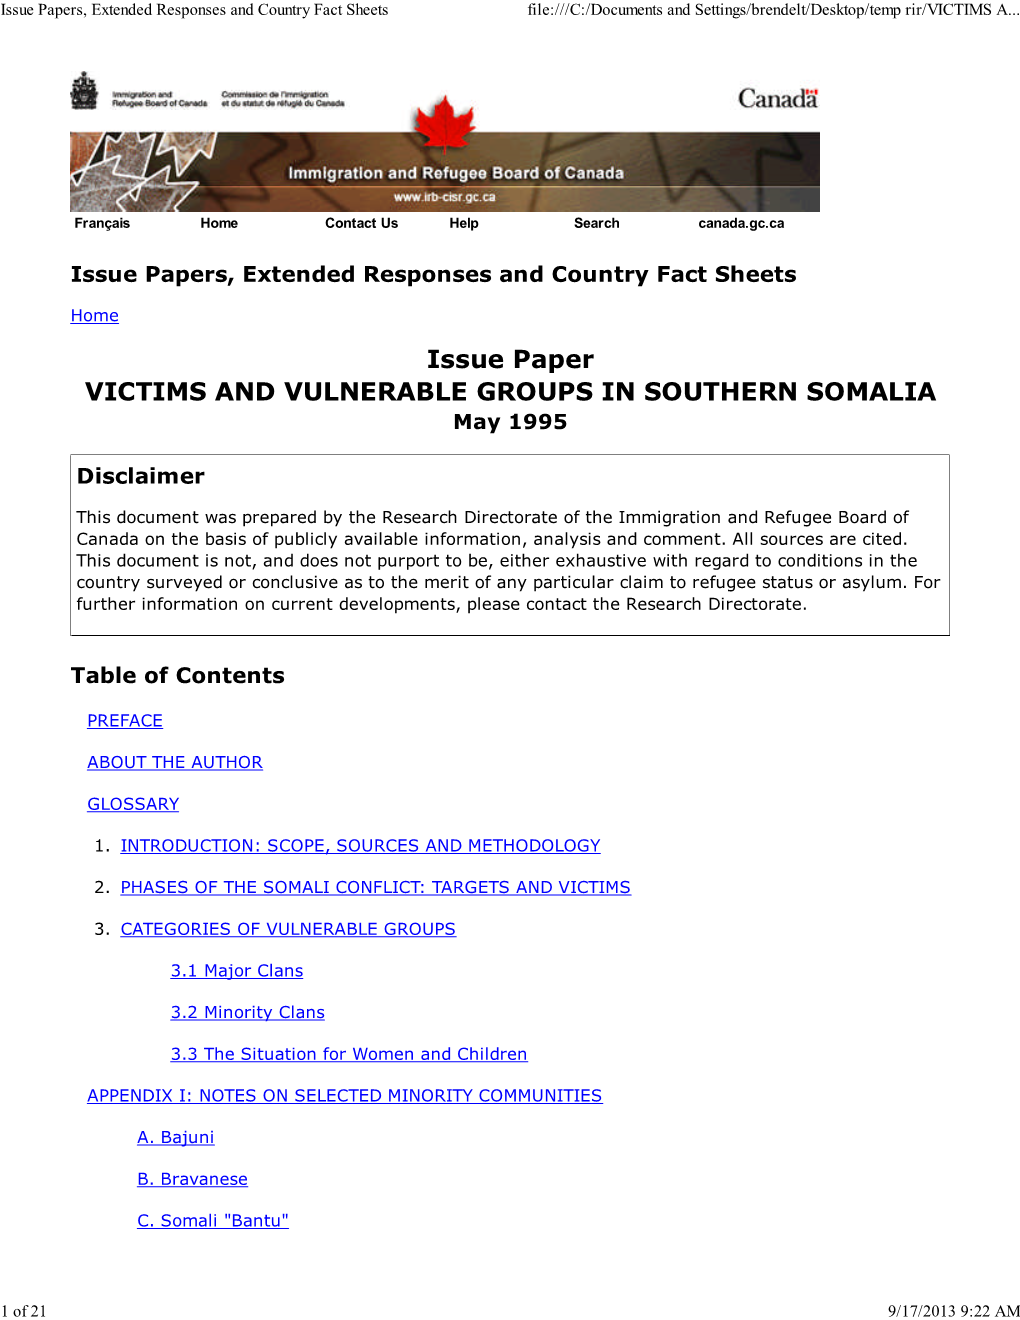 Issue Paper VICTIMS and VULNERABLE GROUPS in SOUTHERN SOMALIA May 1995